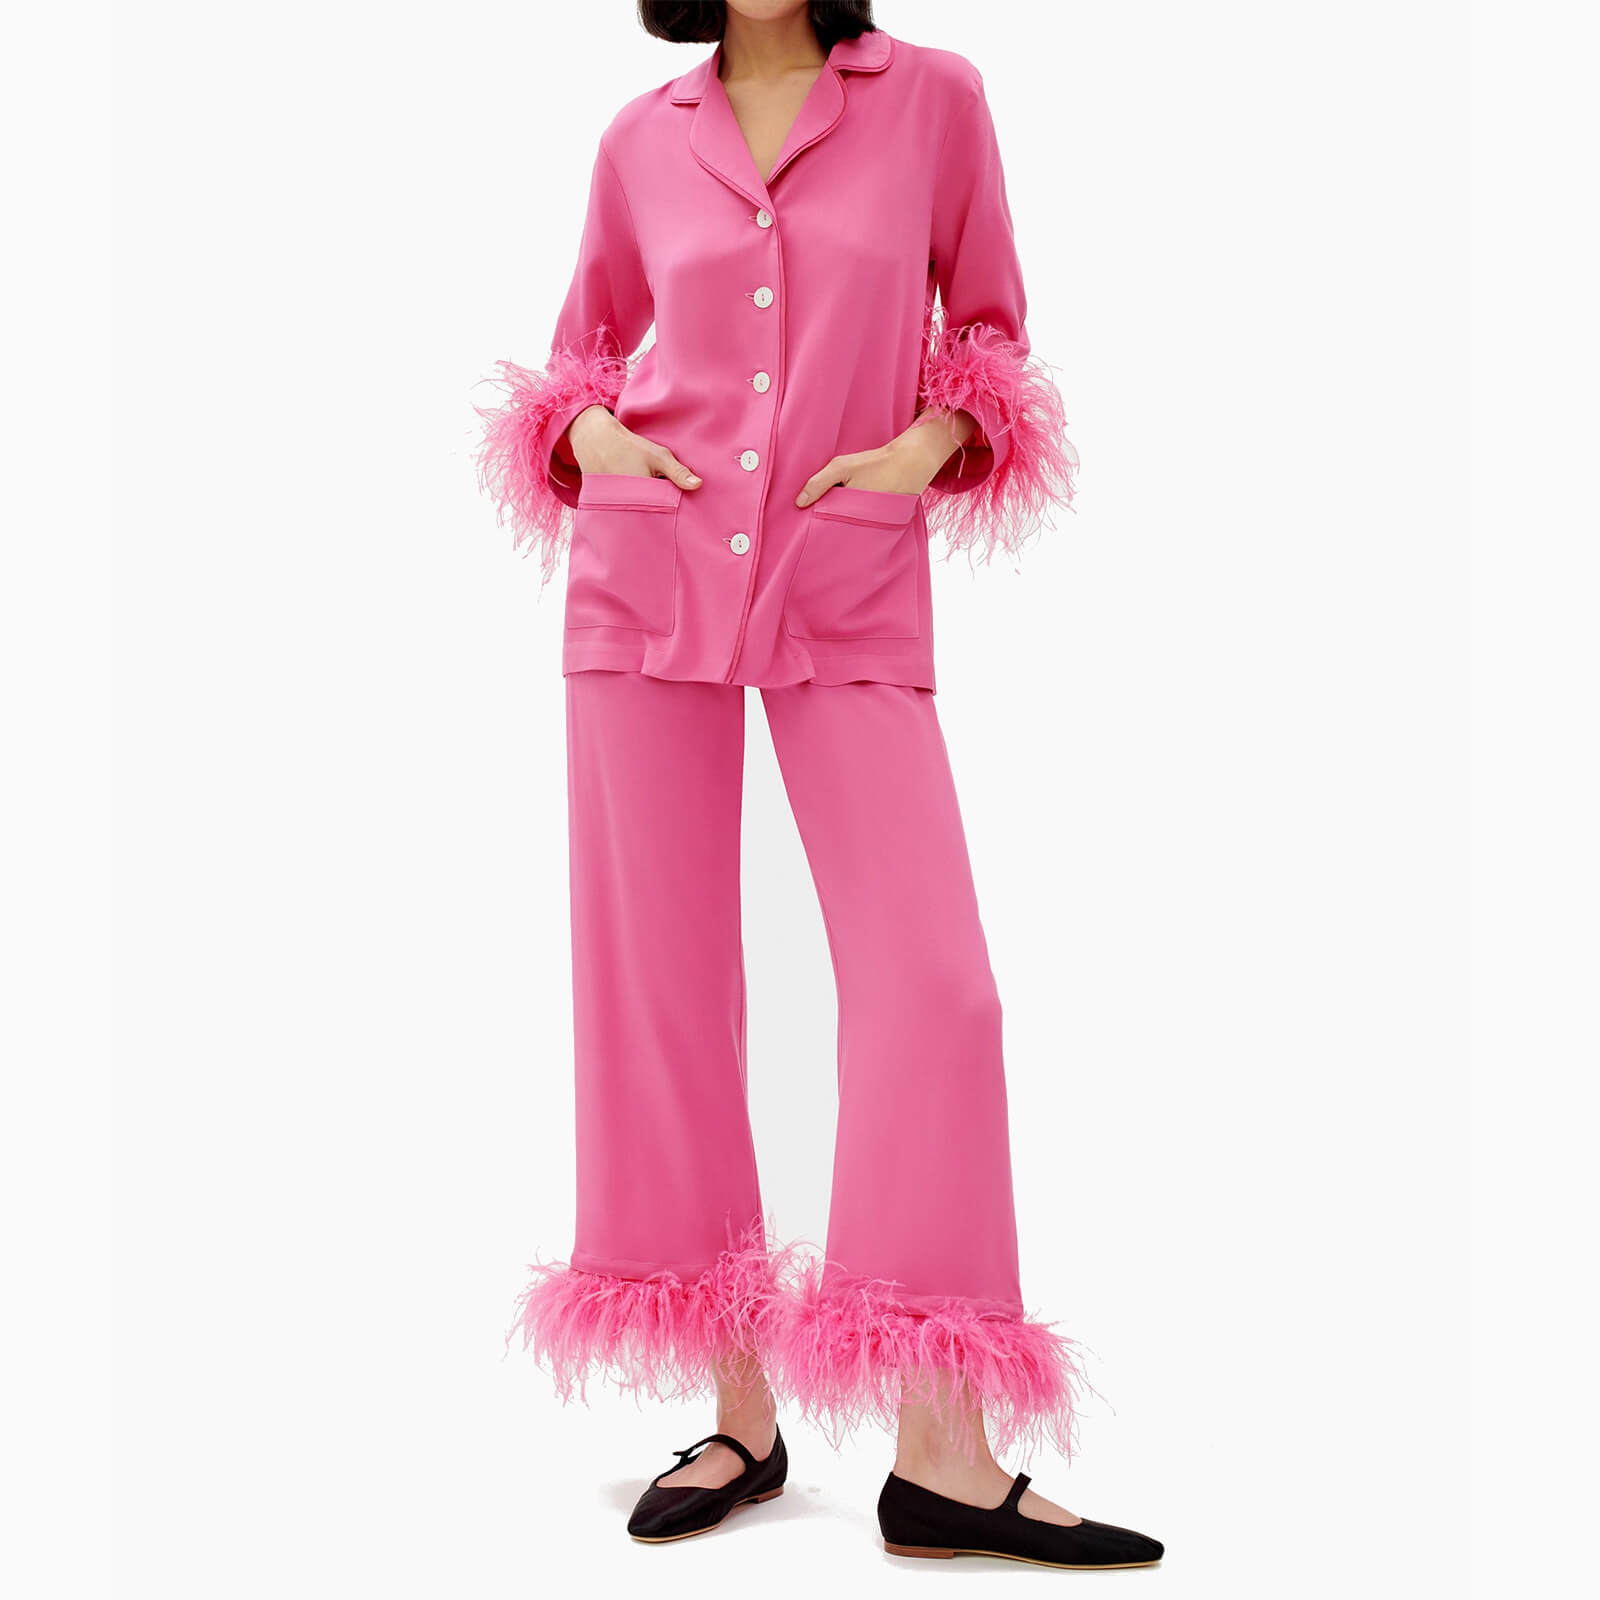 Sleeper Women's Party Pajama Set With Feathers - Hot Pink - XL